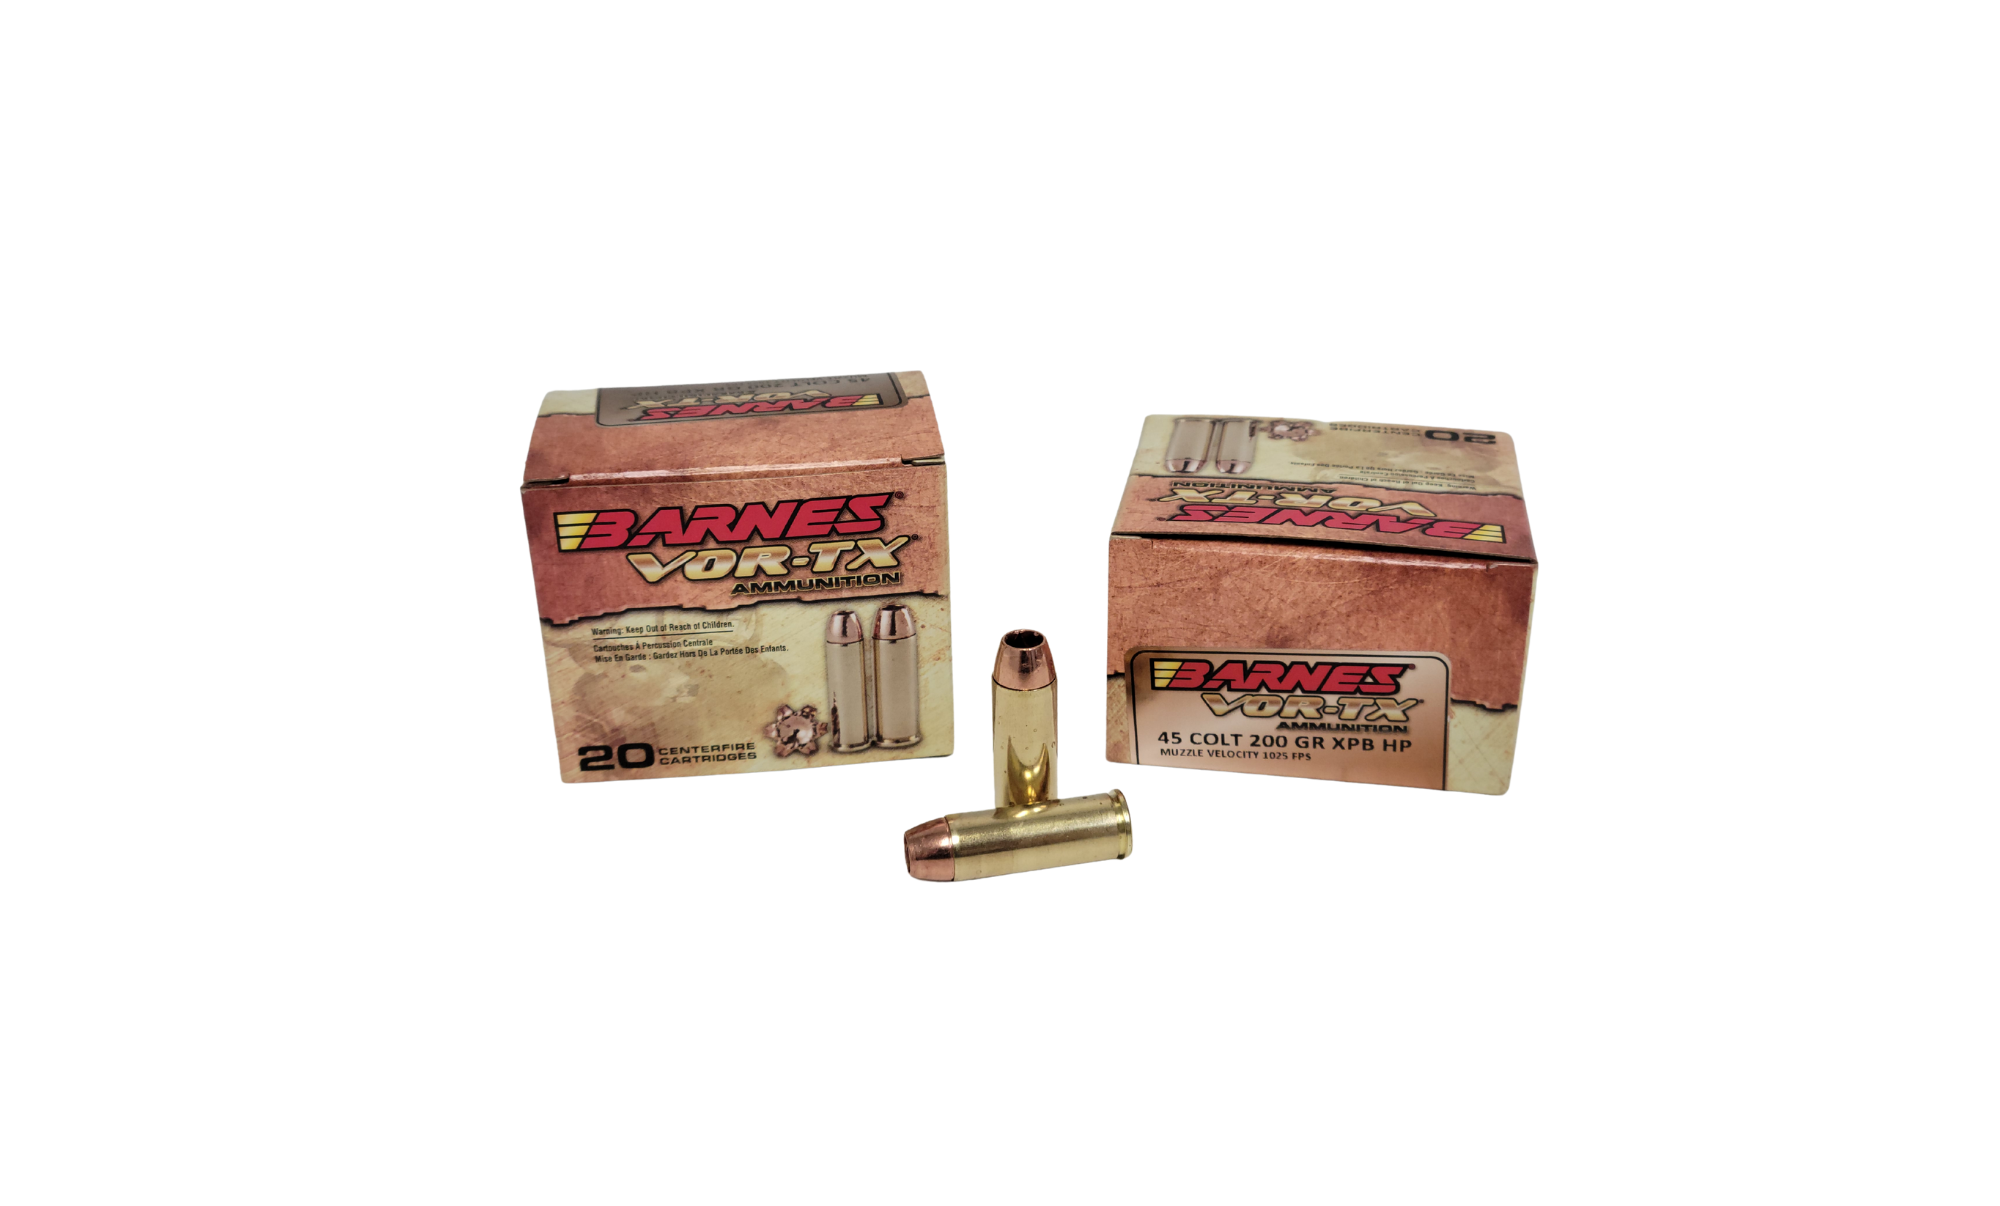 Atomic Subsonic 9mm Luger 147 Grain MATCH Hollow Point 900fps – 50 Rounds (Box) [NO TAX outside Texas] Product Image